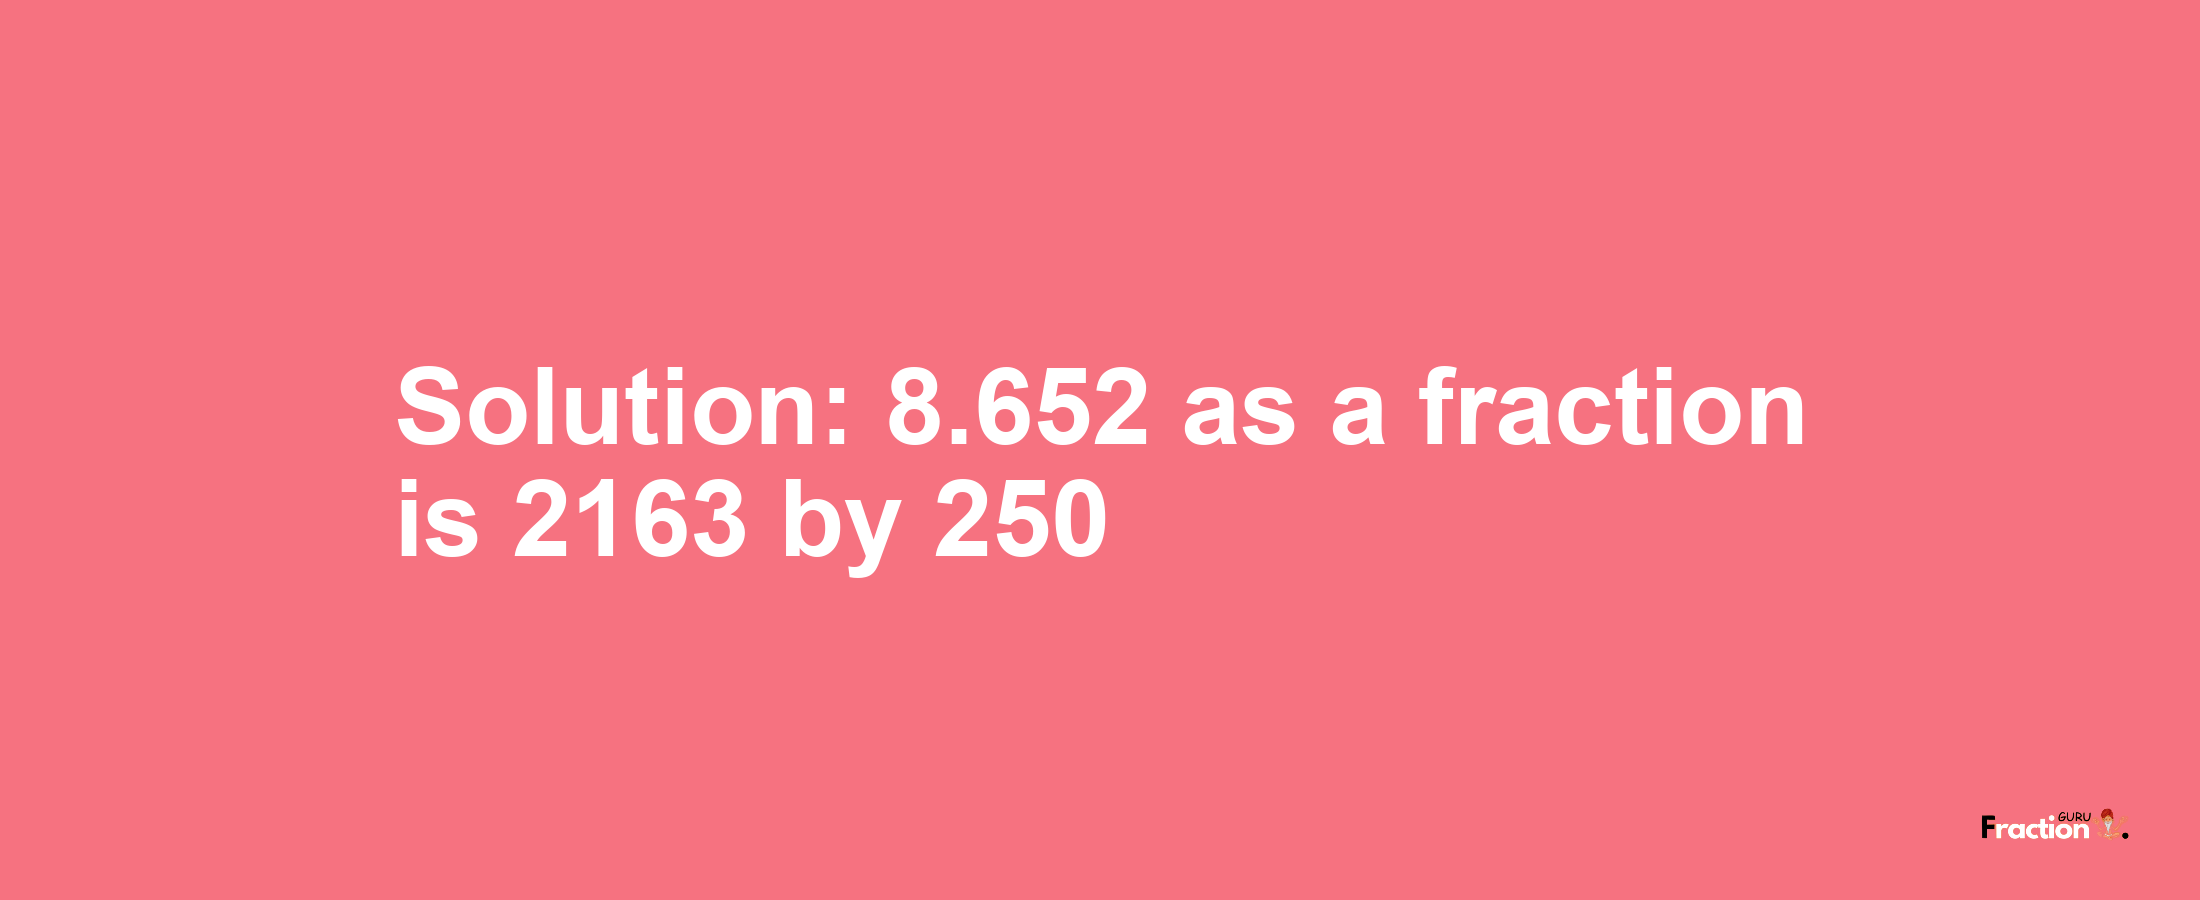 Solution:8.652 as a fraction is 2163/250